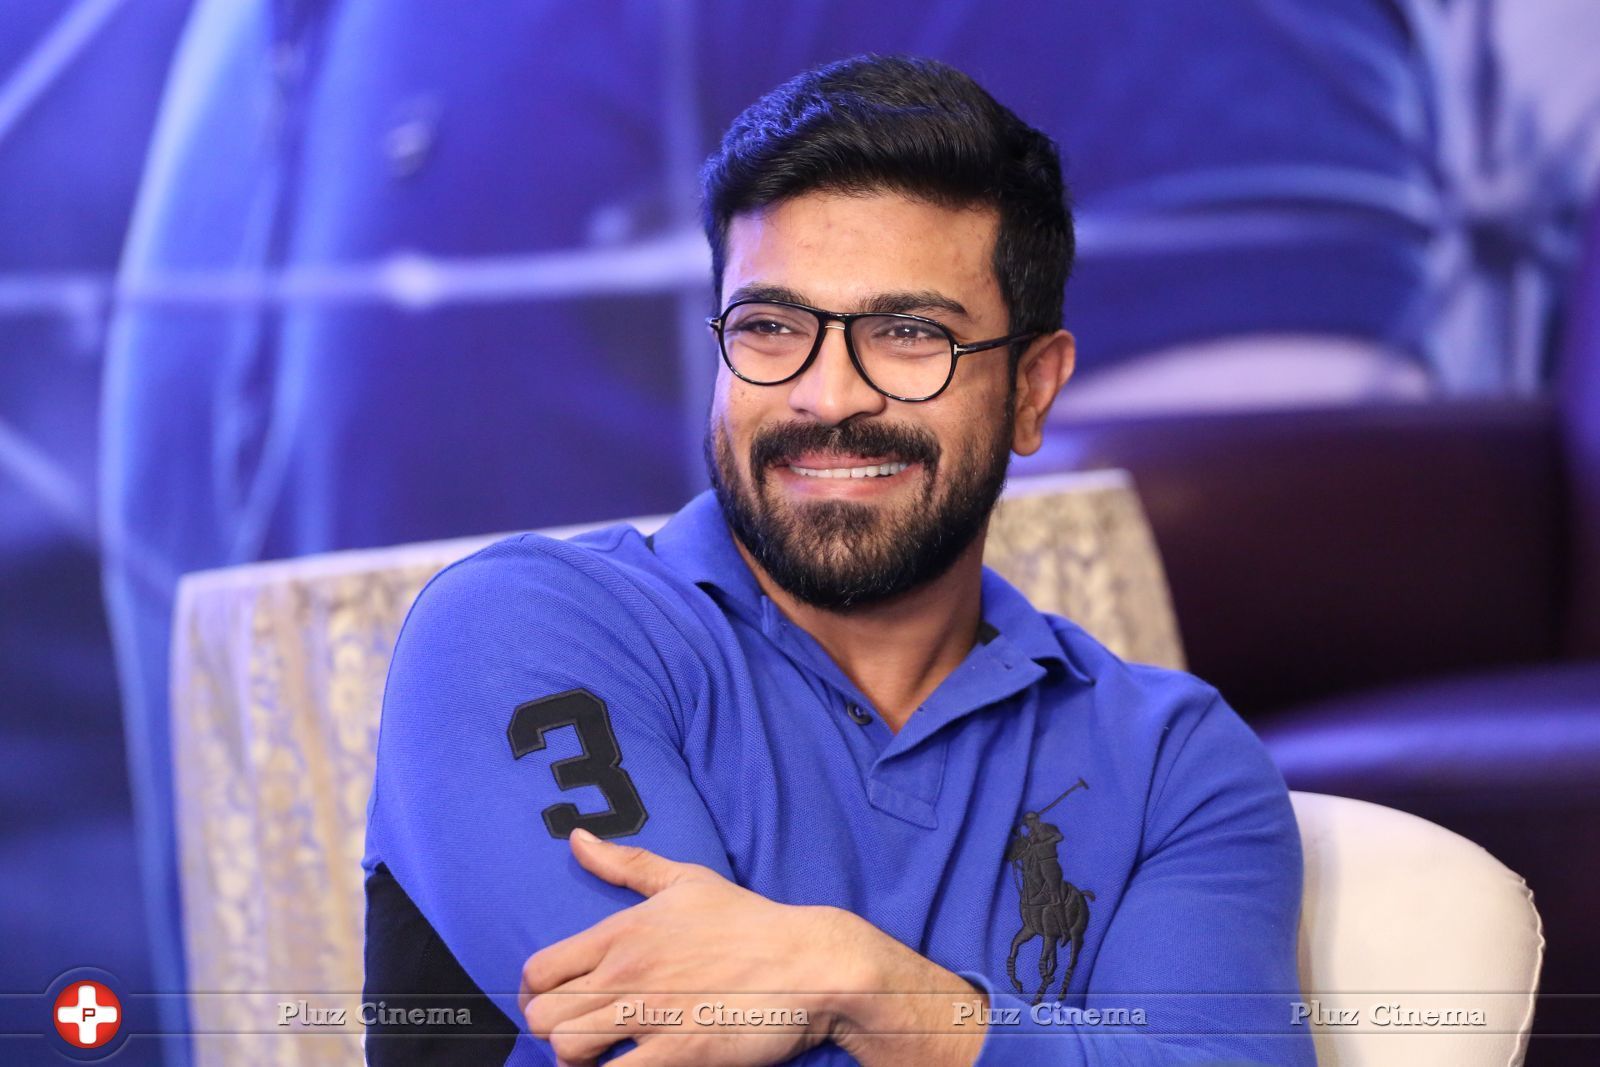 Ram Charan Interview For Dhruva Photos | Picture 1444653